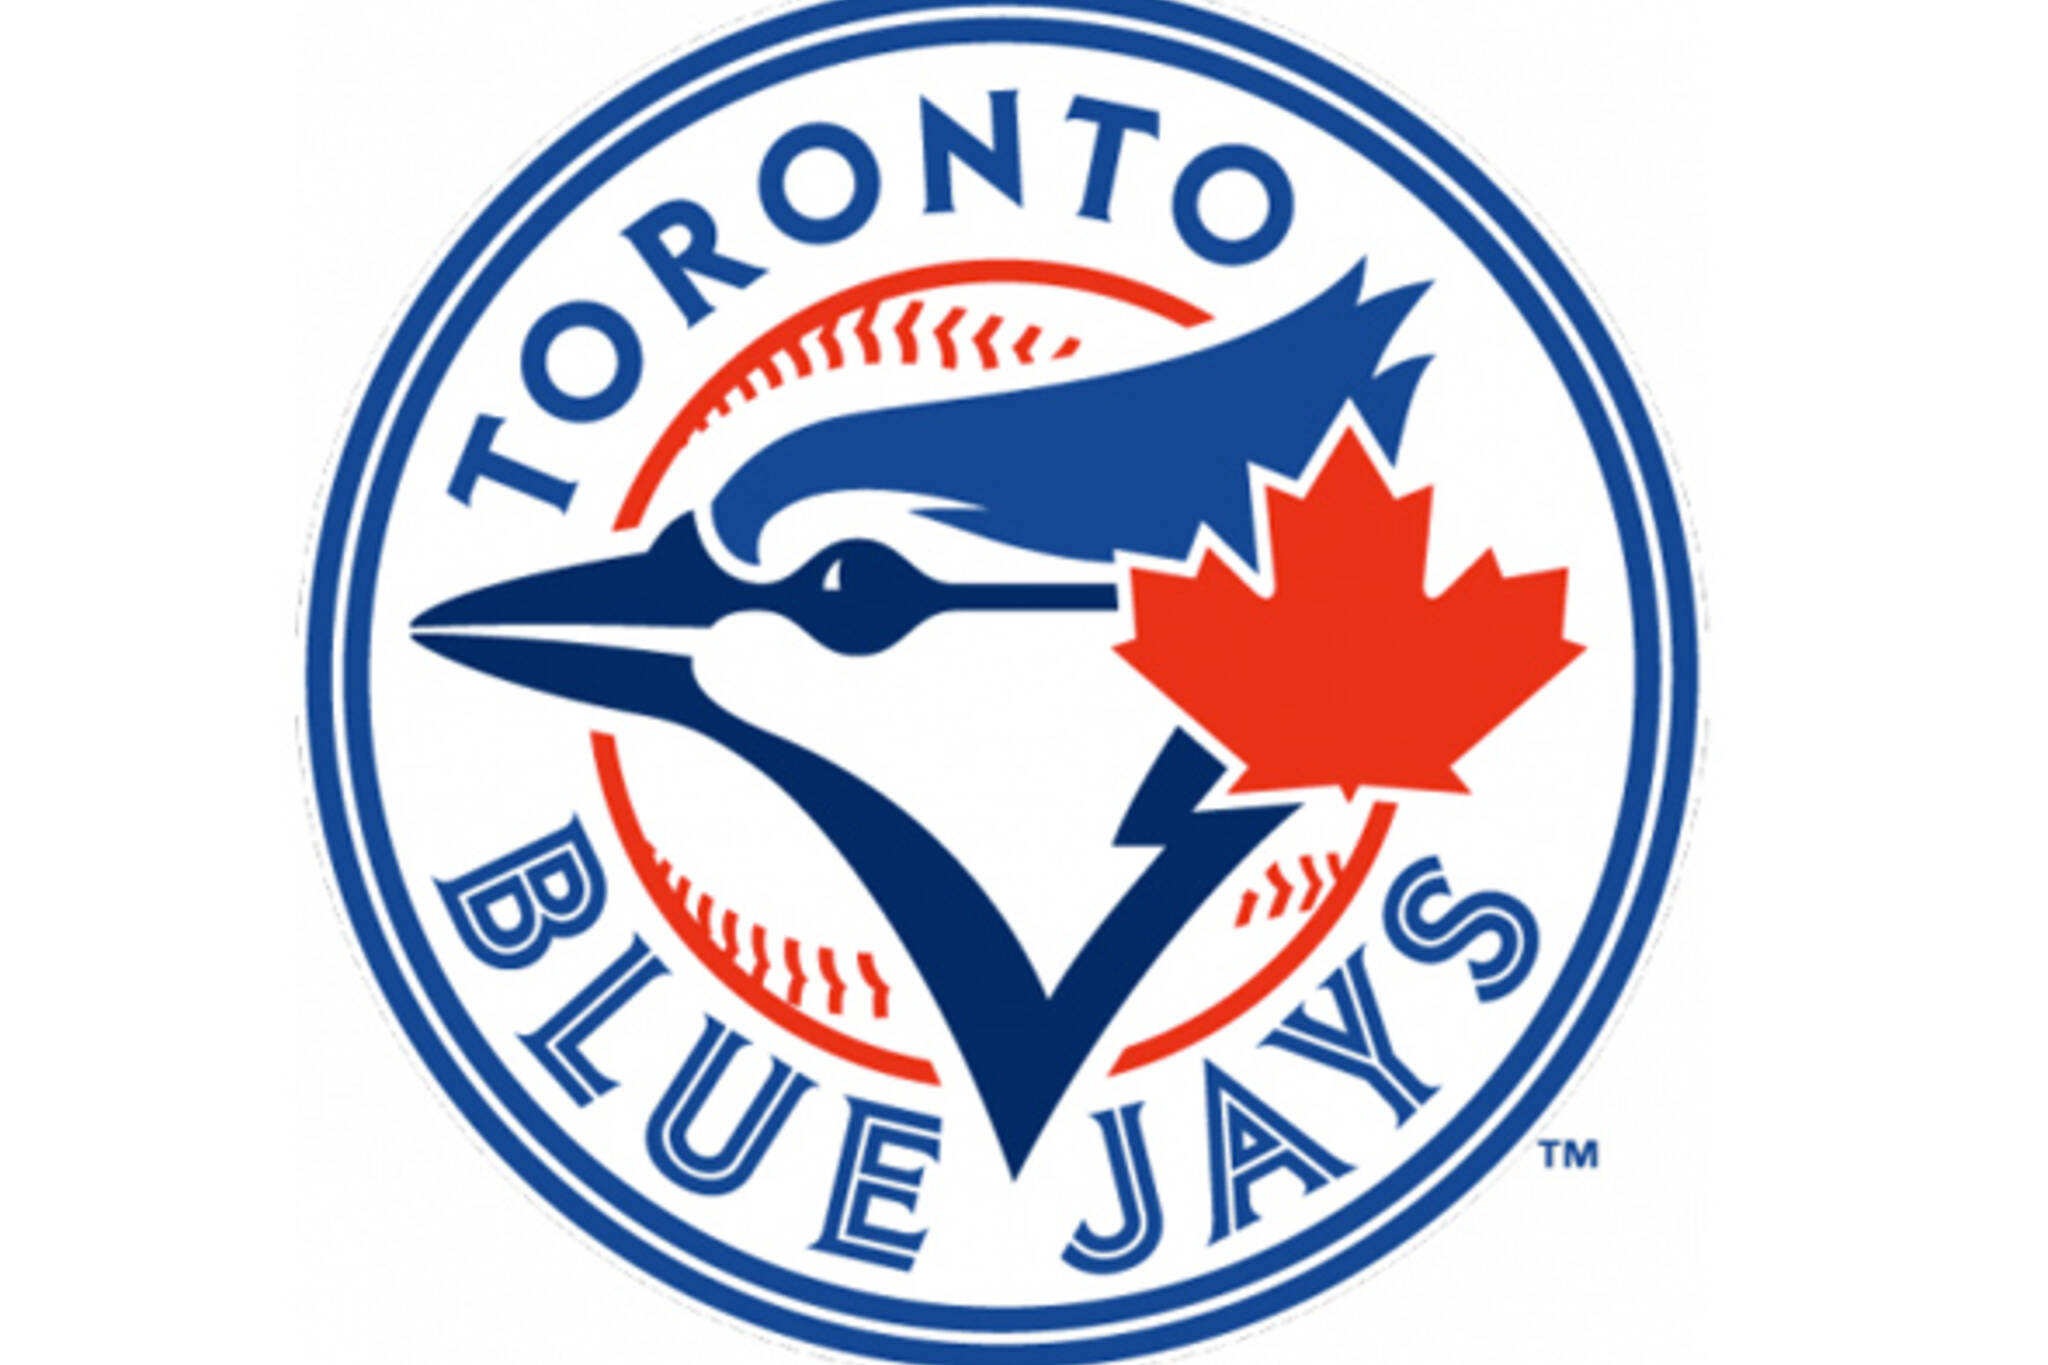 What is your favourite logo? : r/Torontobluejays